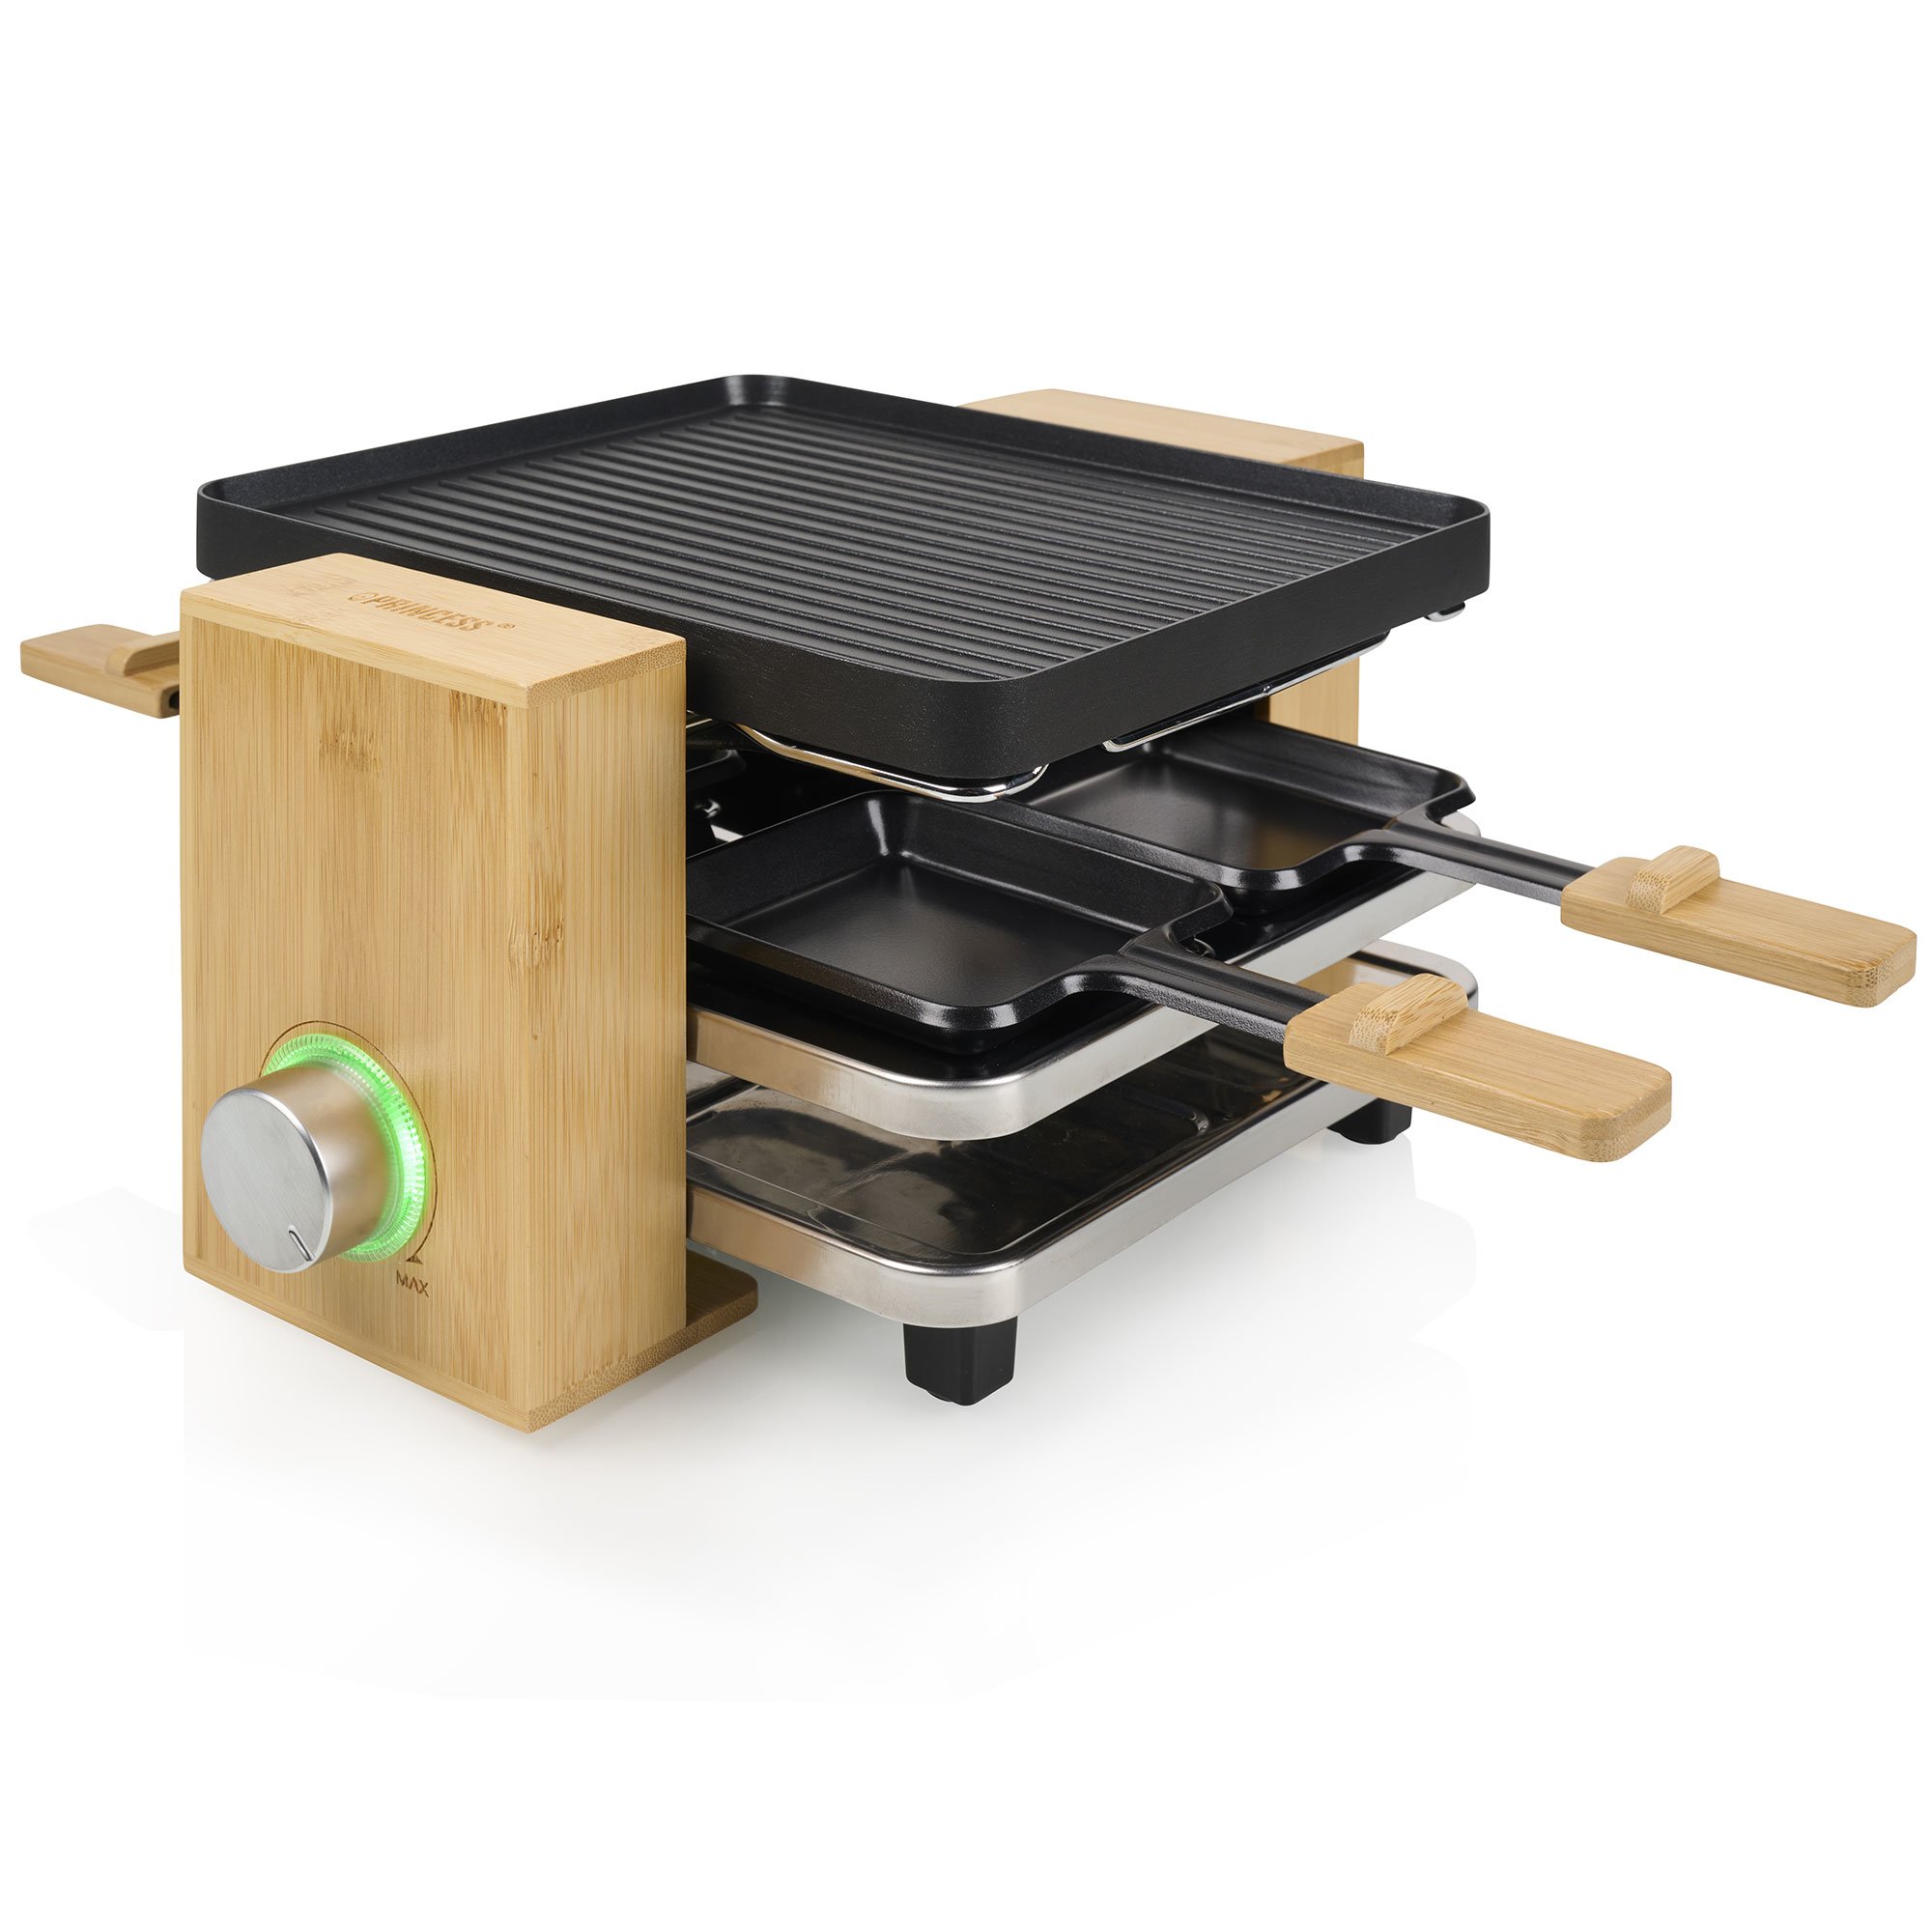 #2 - Princess Pure 4 raclette grill